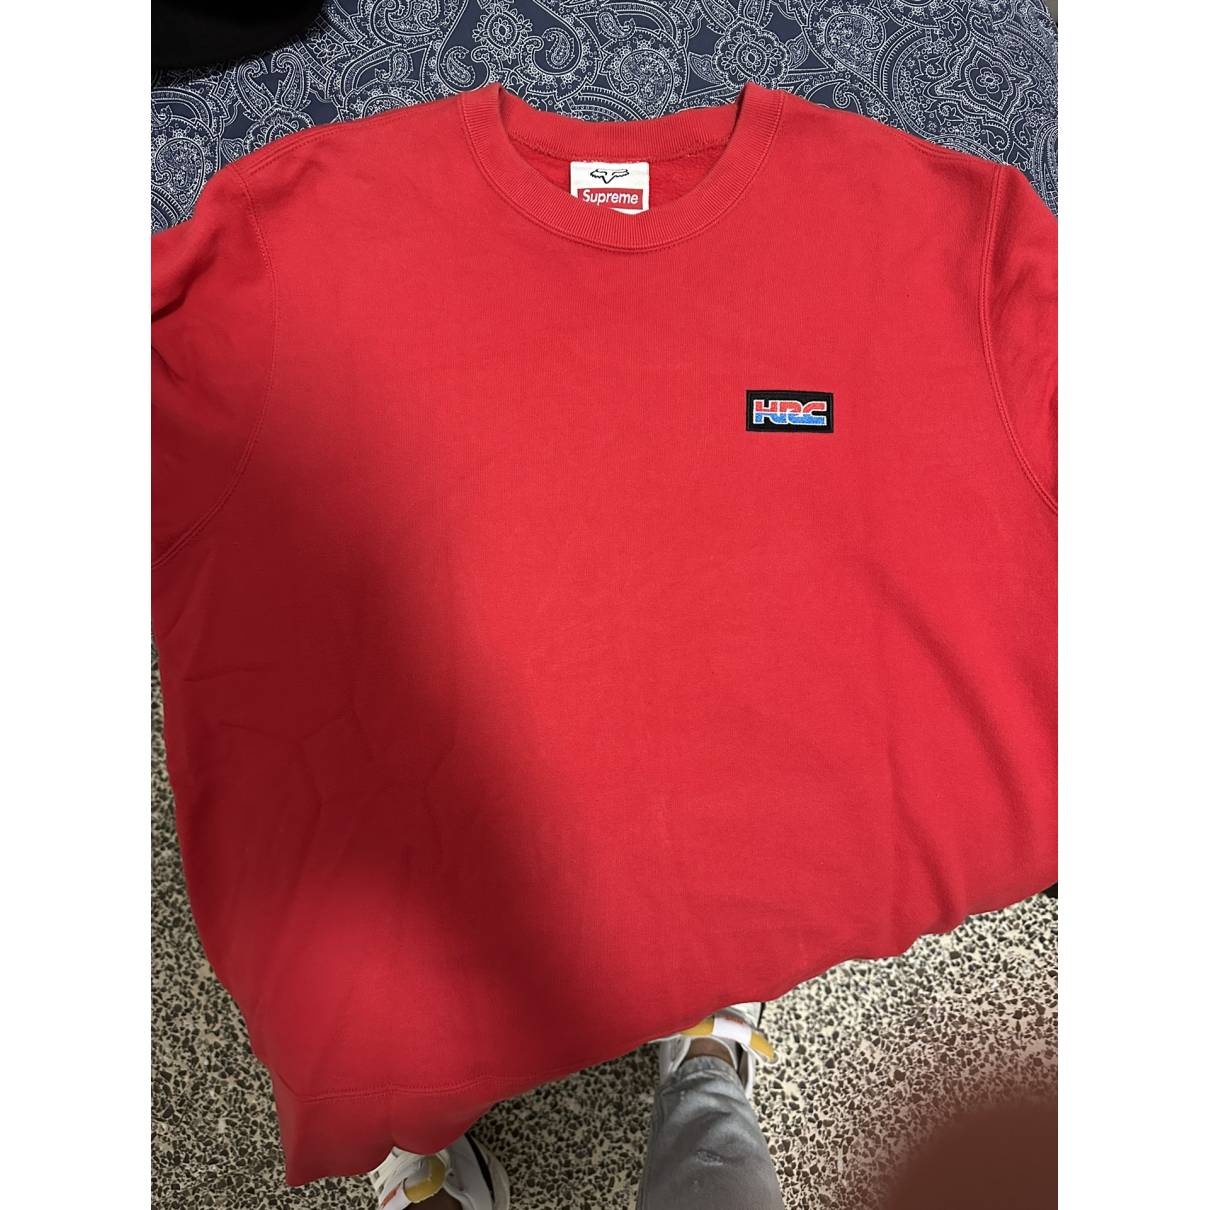 Supreme - Authenticated Sweatshirt - Cotton Red for Men, Very Good Condition